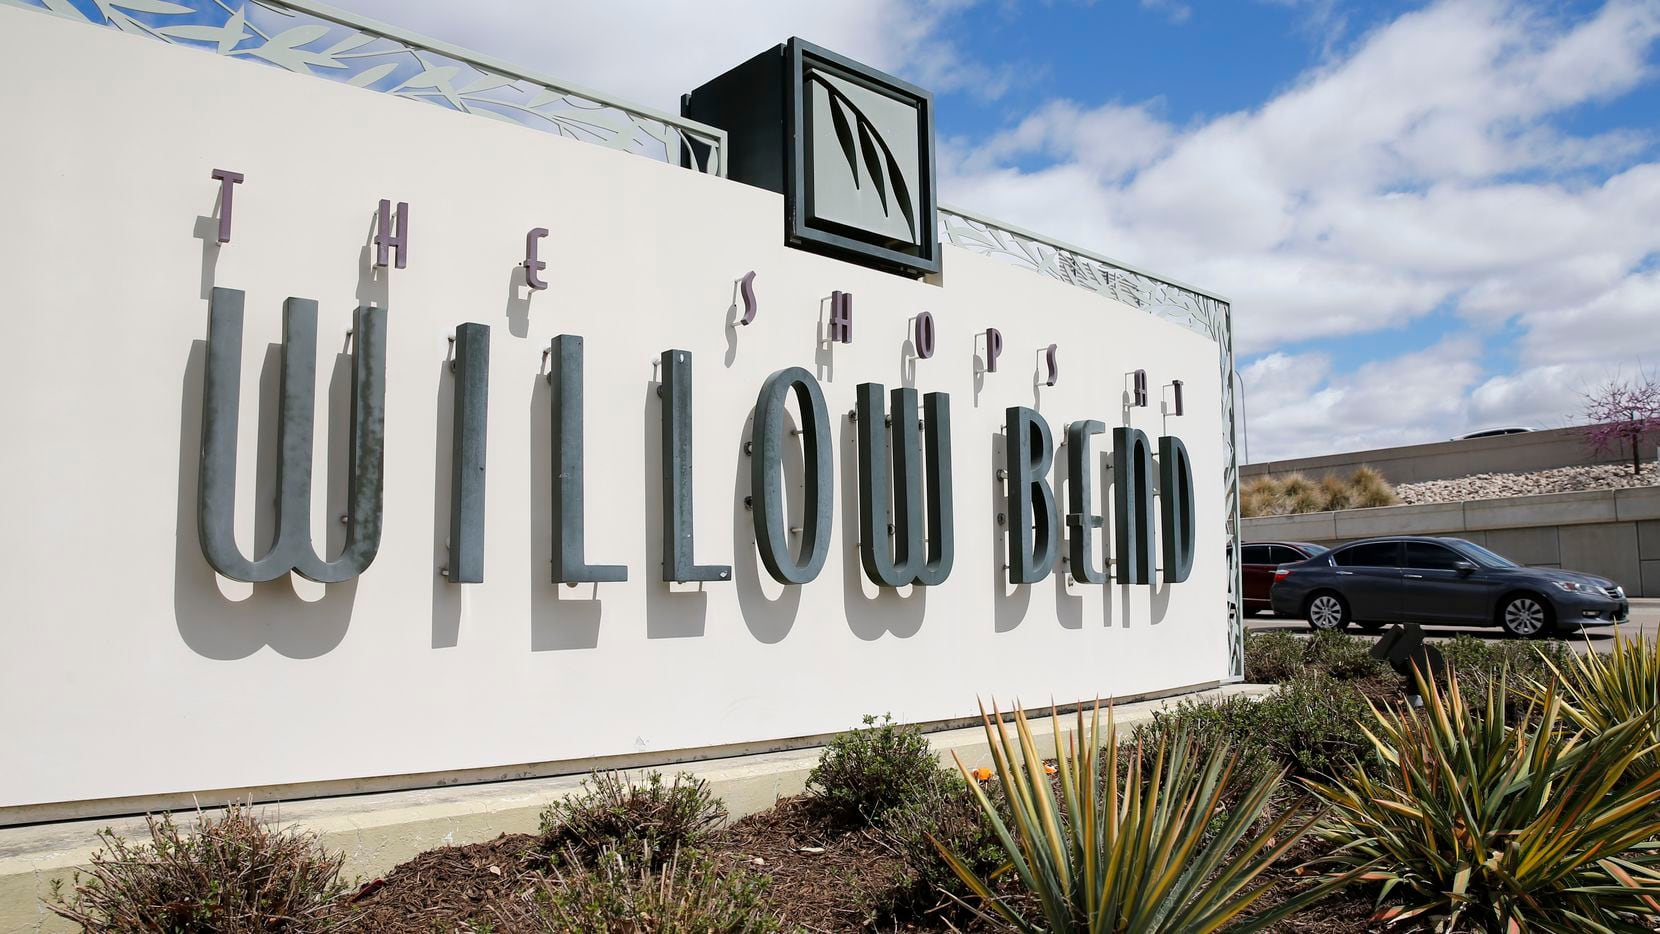 The Shops at Willow Bend's new owner has added the Shop Now! platform to the mall’s website.